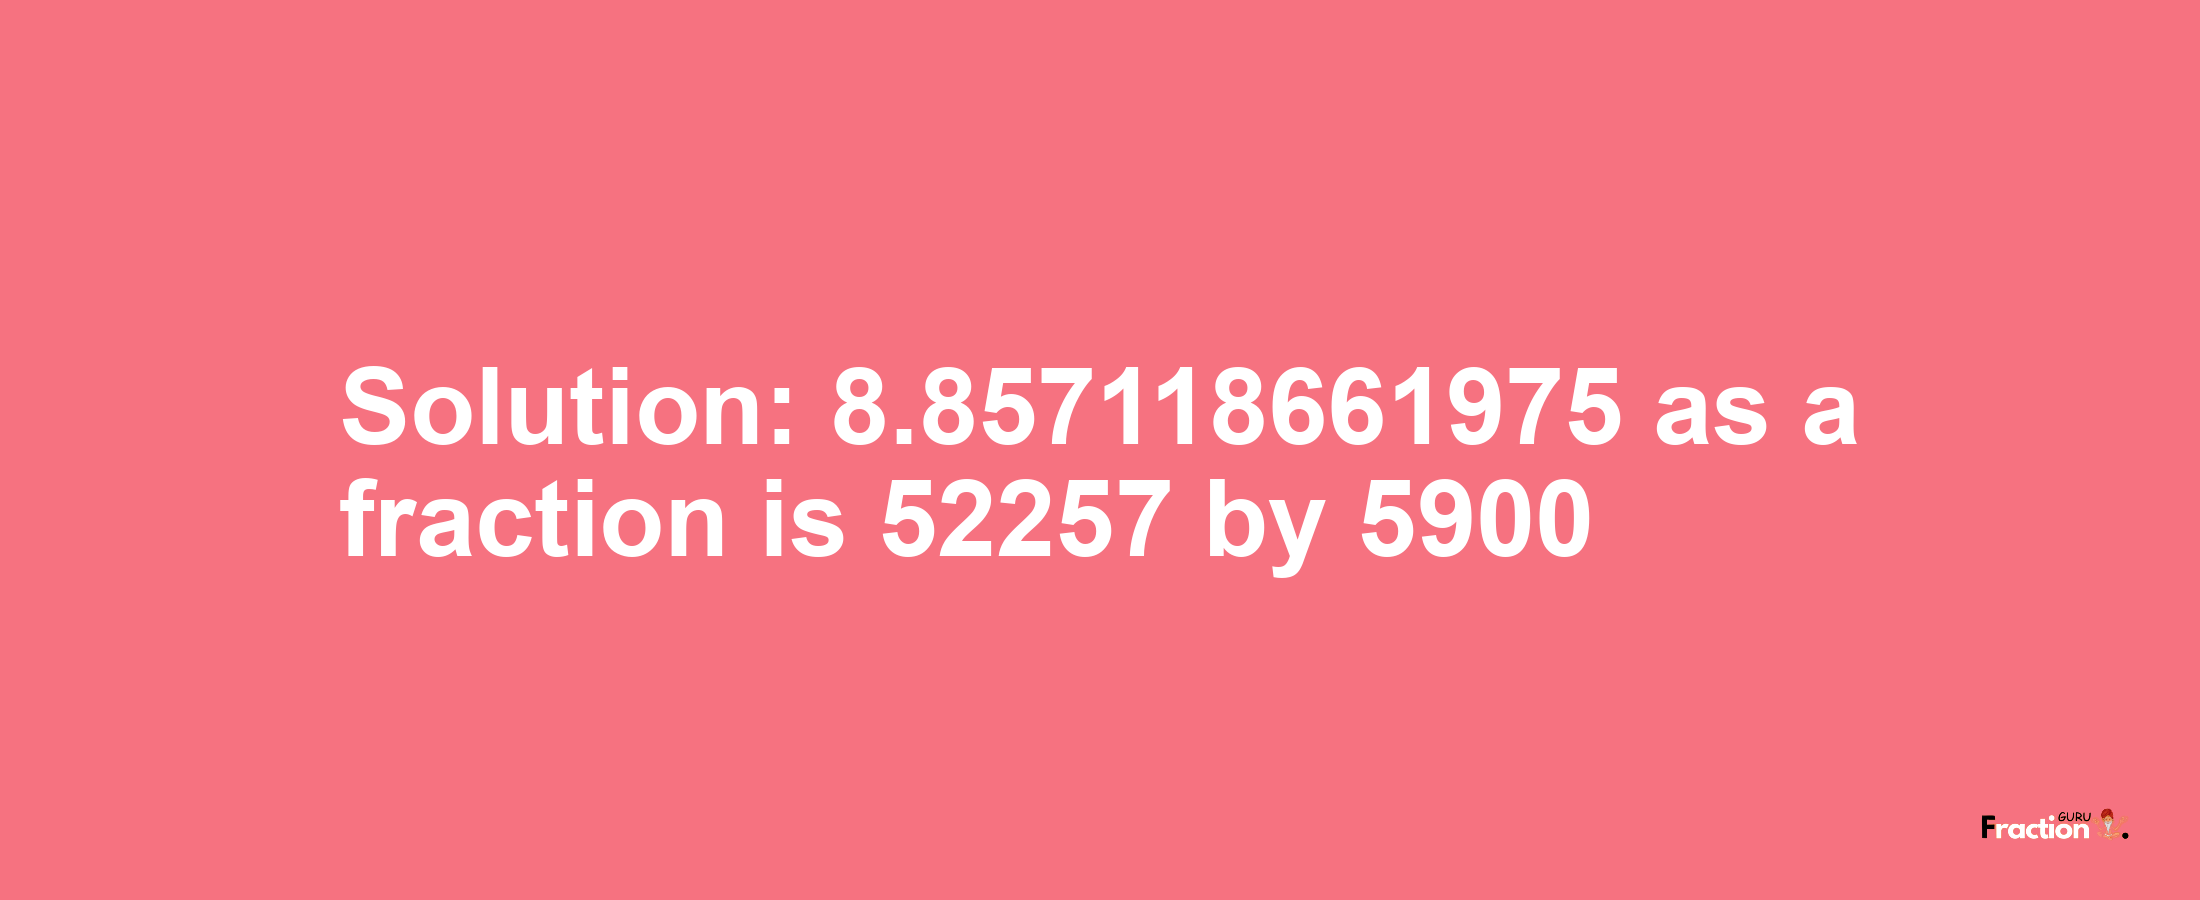 Solution:8.857118661975 as a fraction is 52257/5900